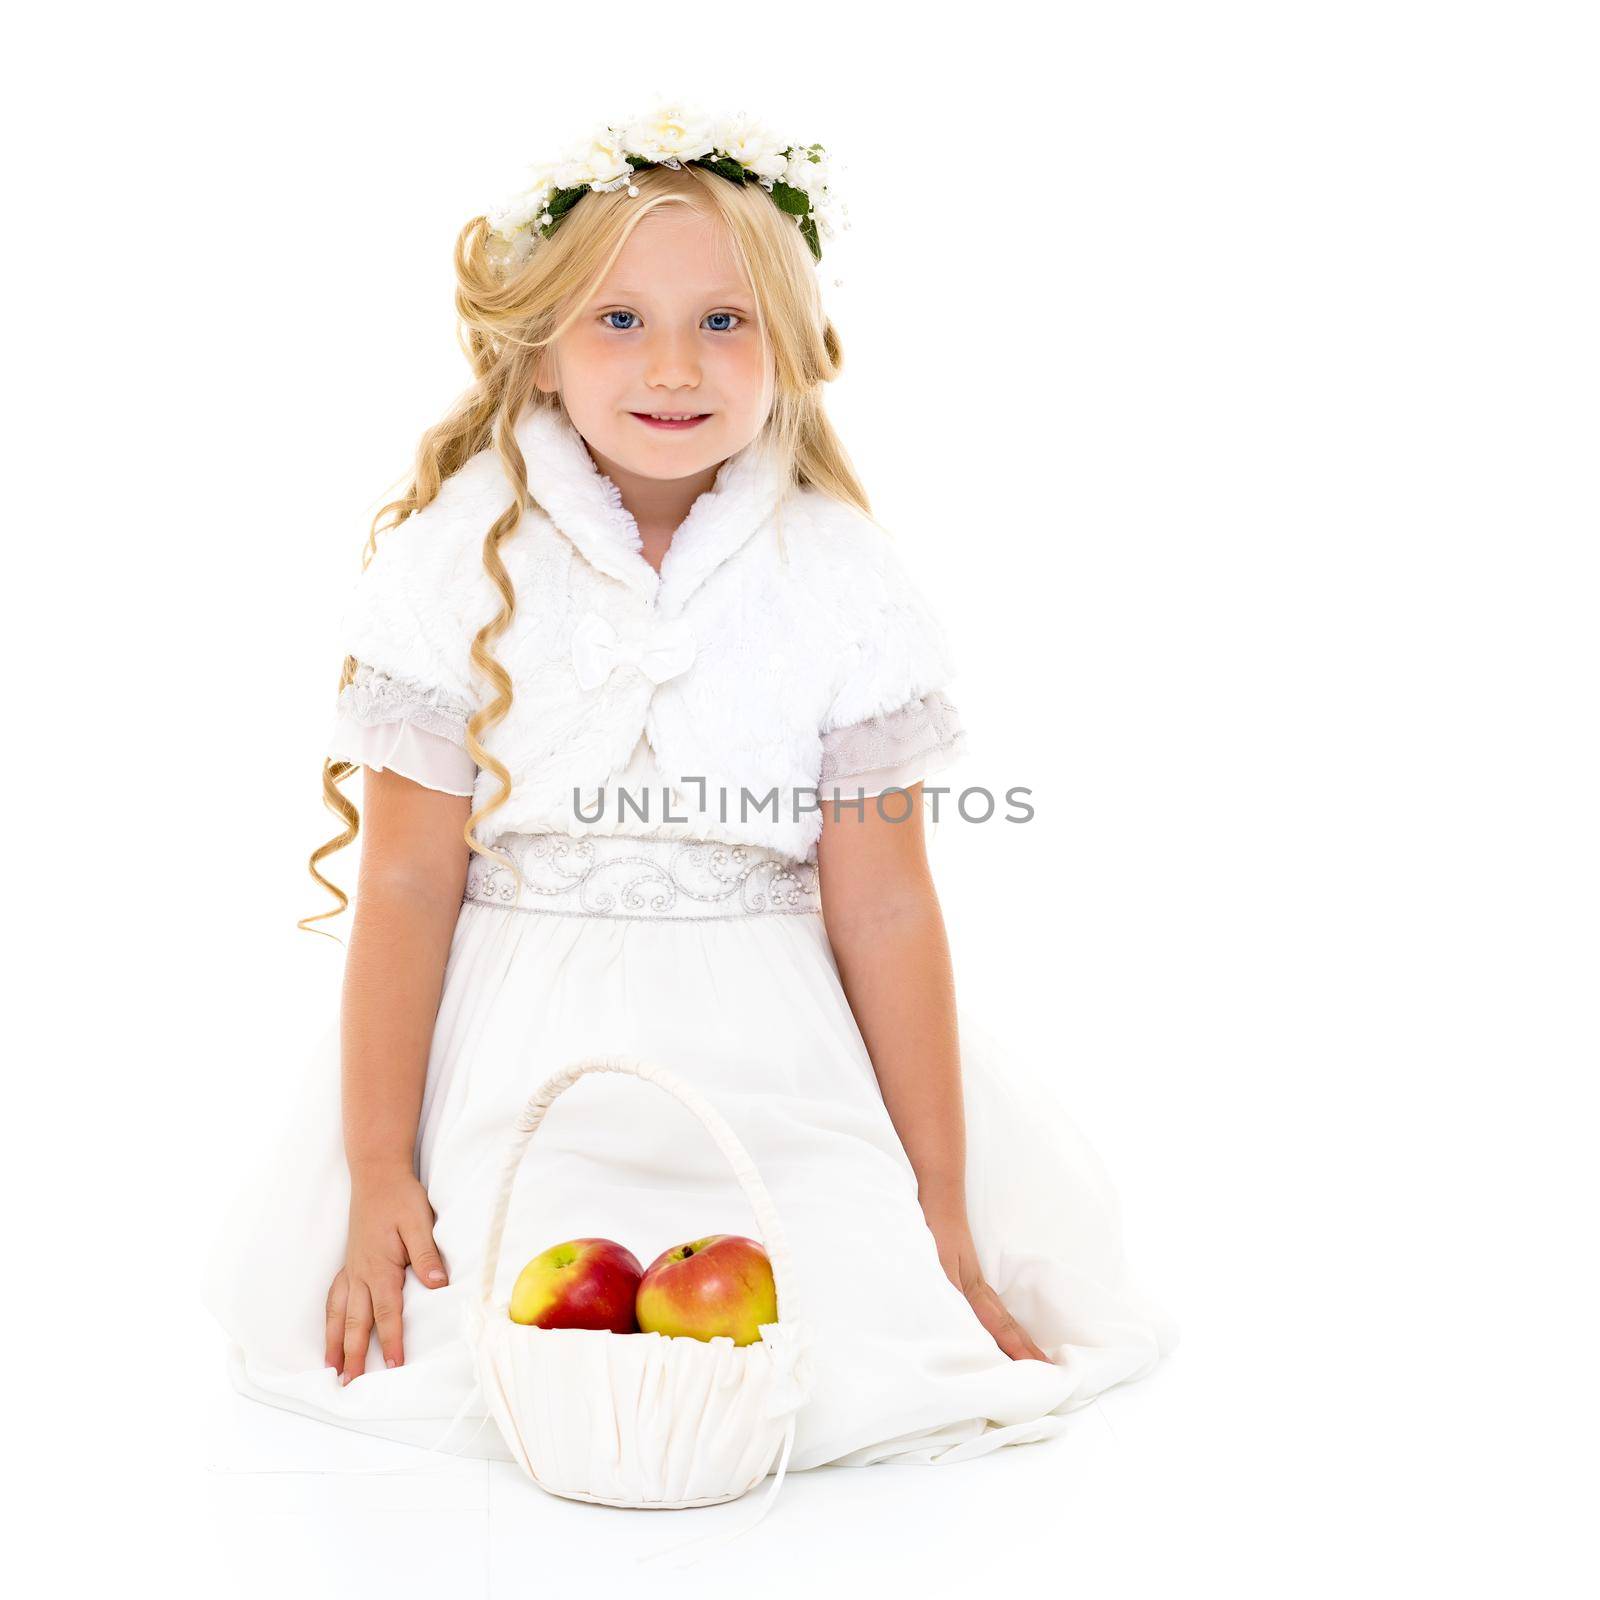 Little girl with a basket of apples. The concept of healthy eating, happy childhood. Isolated on white background.